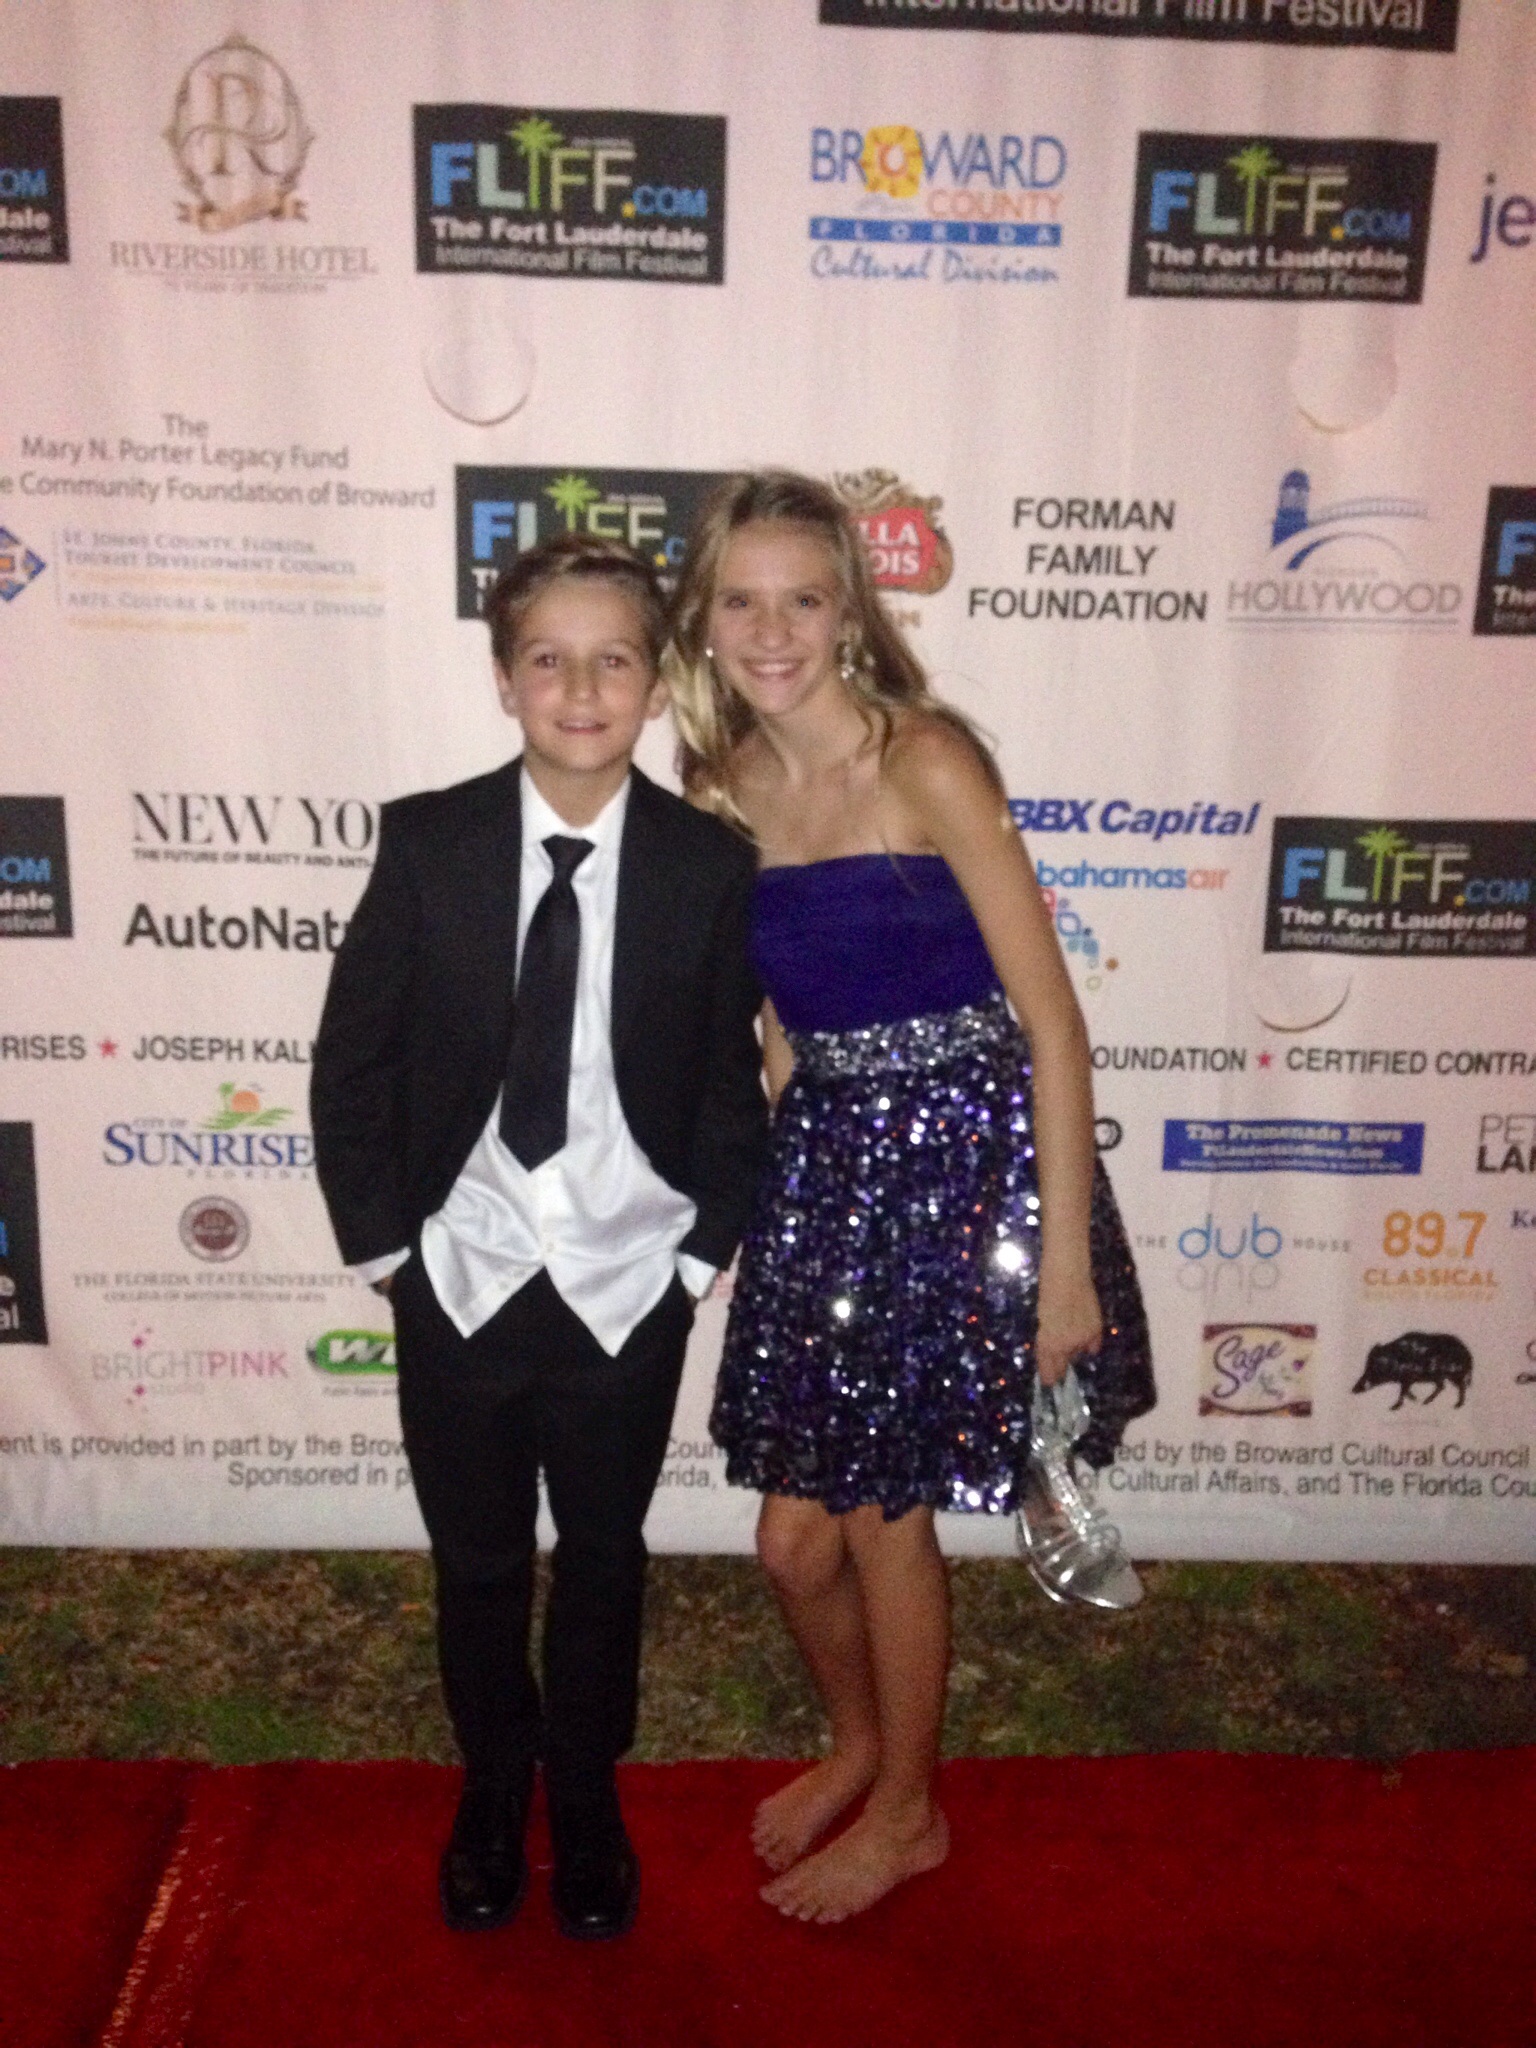 The Life Exchange Movie Premiere With my co-star Megan Gill who plays my sister in the movie